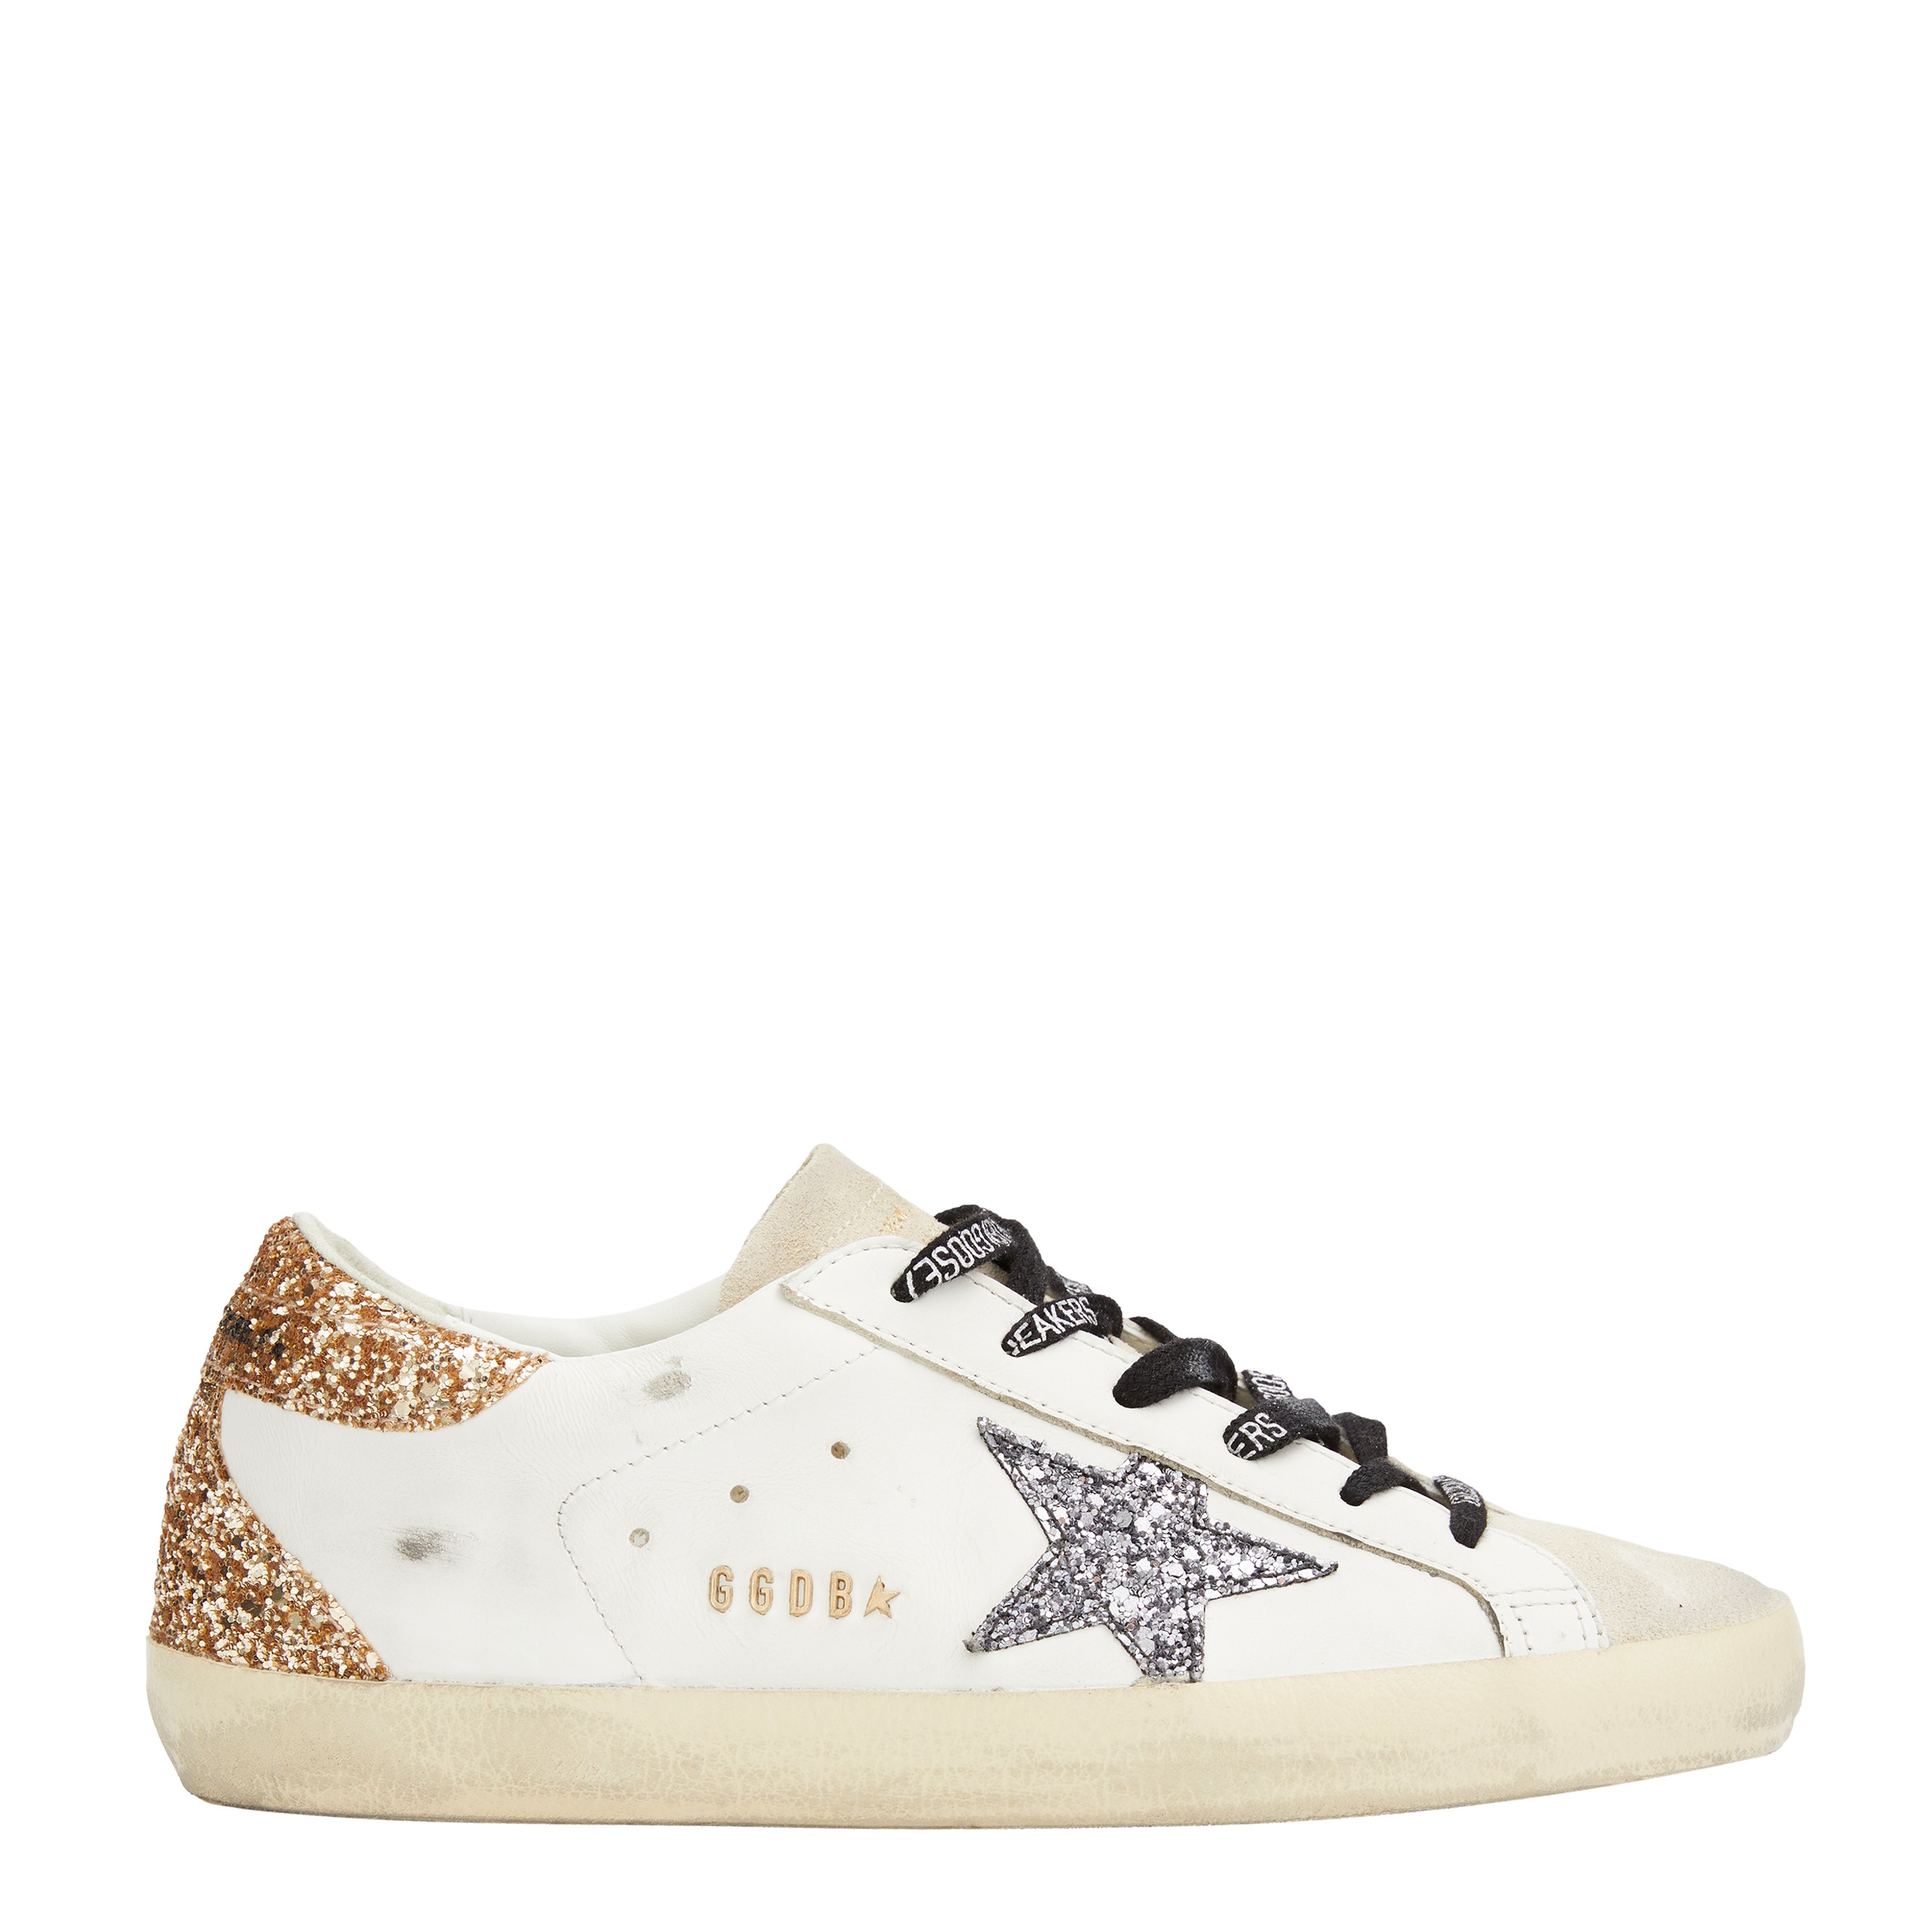 None Golden Goose Deluxe Brand GWF00102/F005358/82532, размер 36;41 GWF00102/F005358/82532 - фото 1